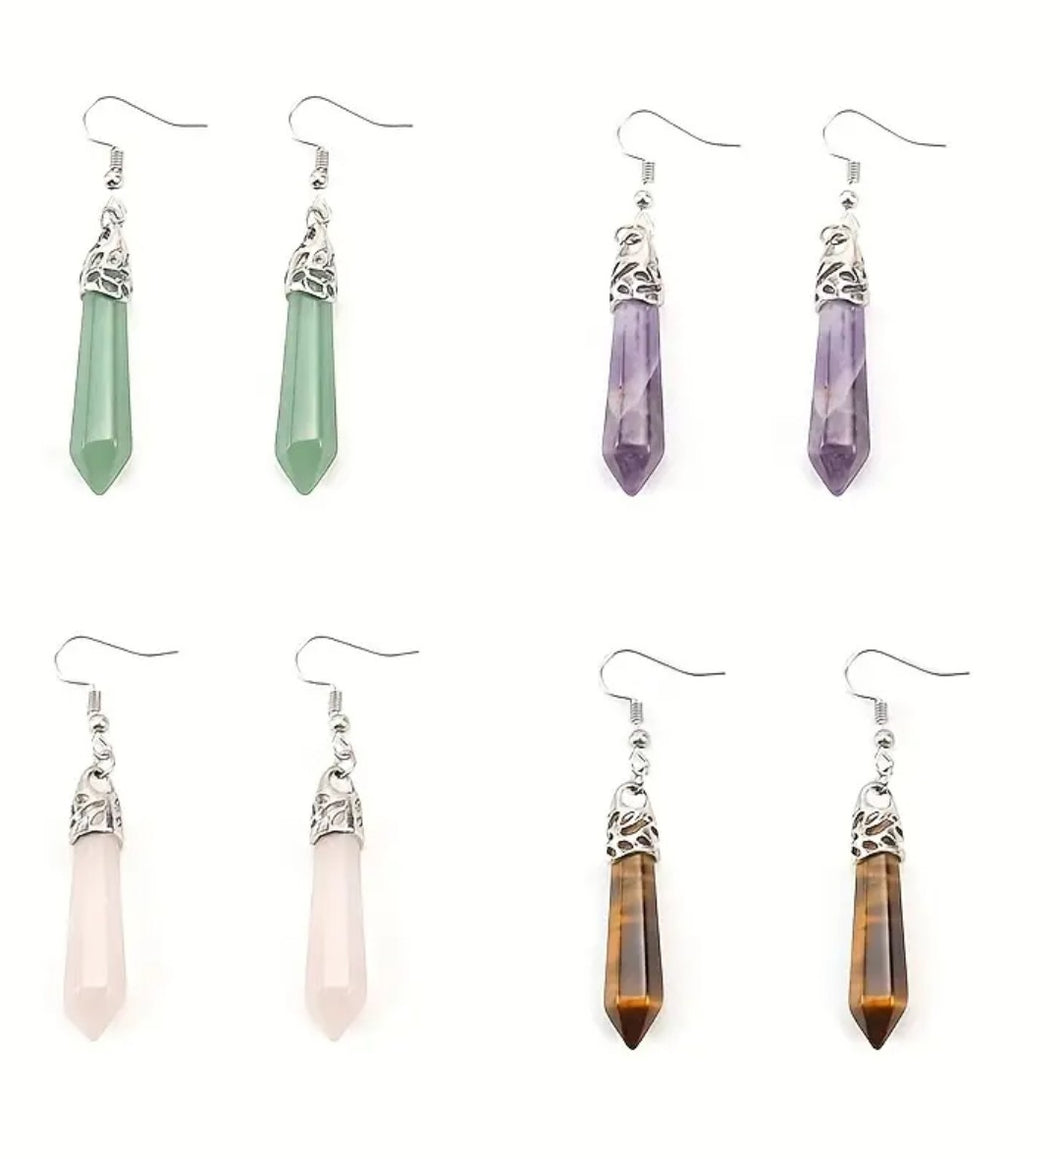 $3 Earrings - Crystals Assorted